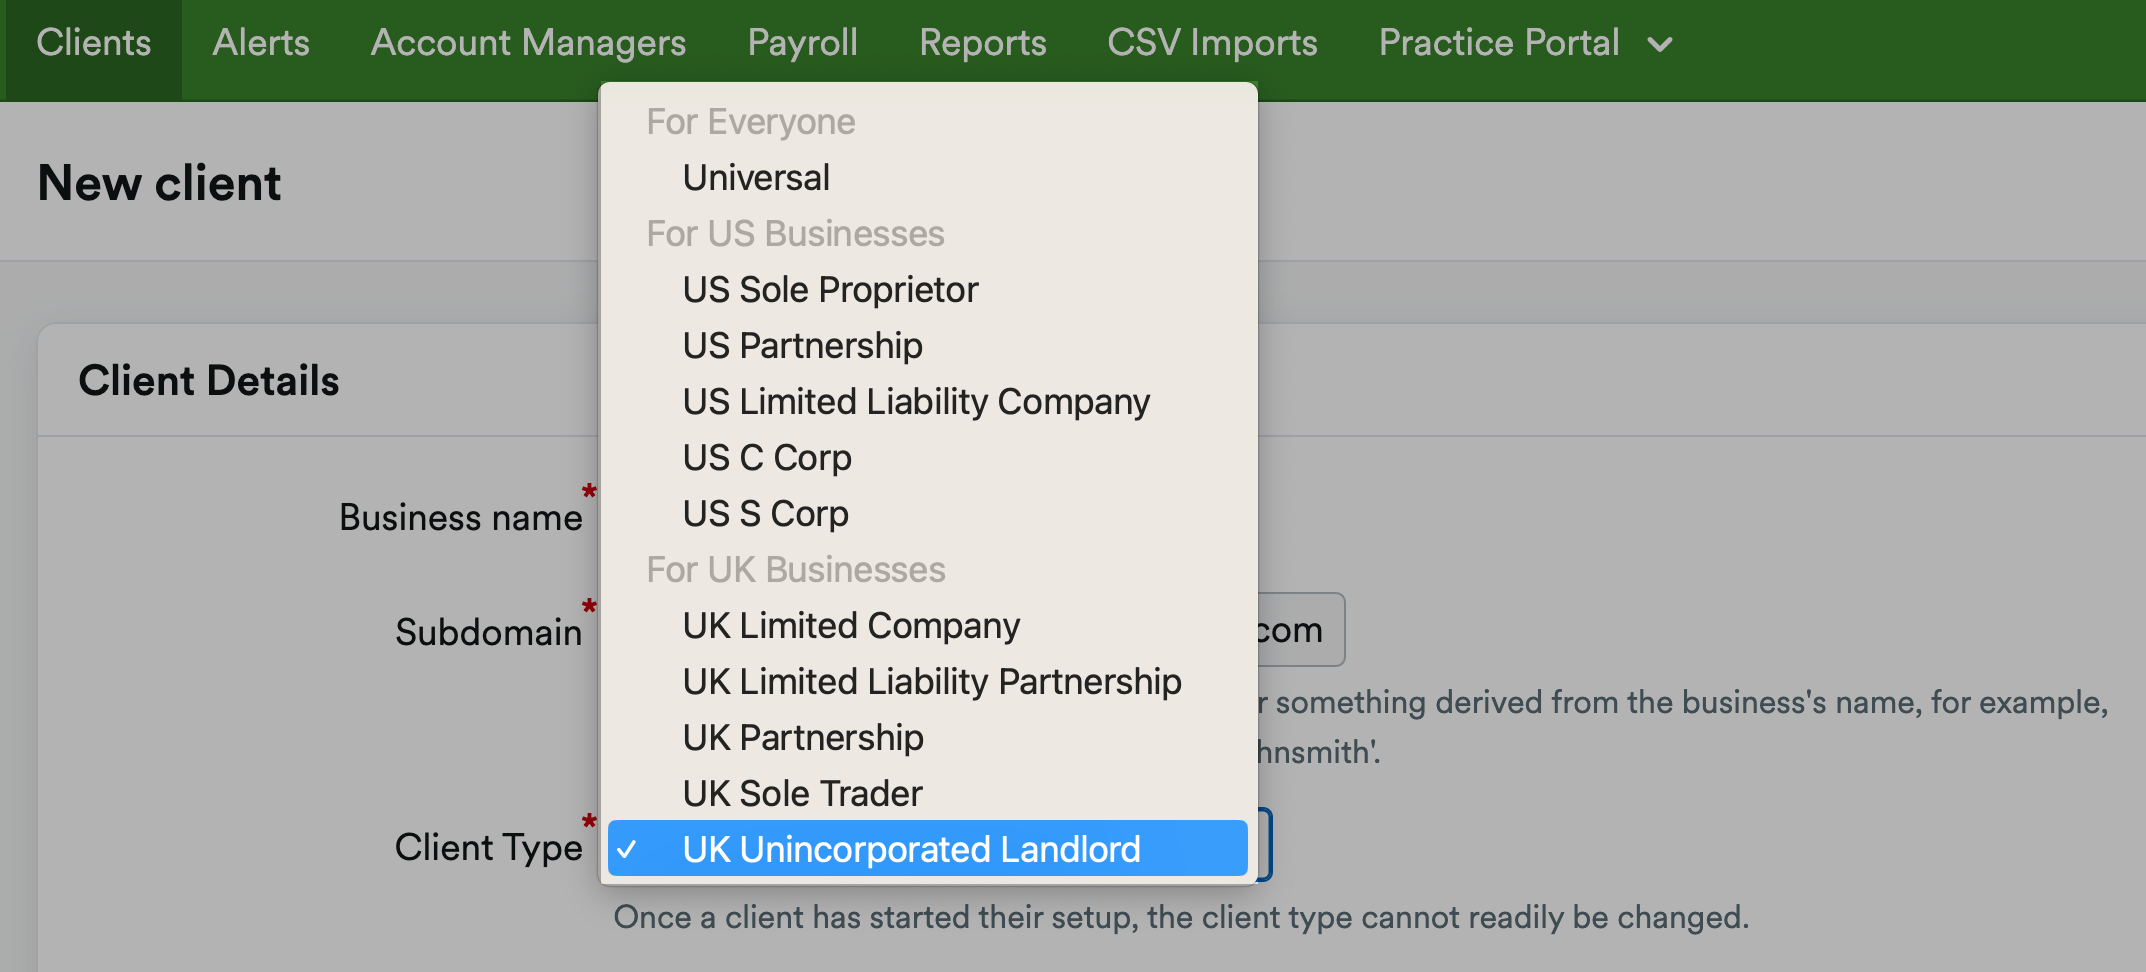 Unincorporated landlord account type.png